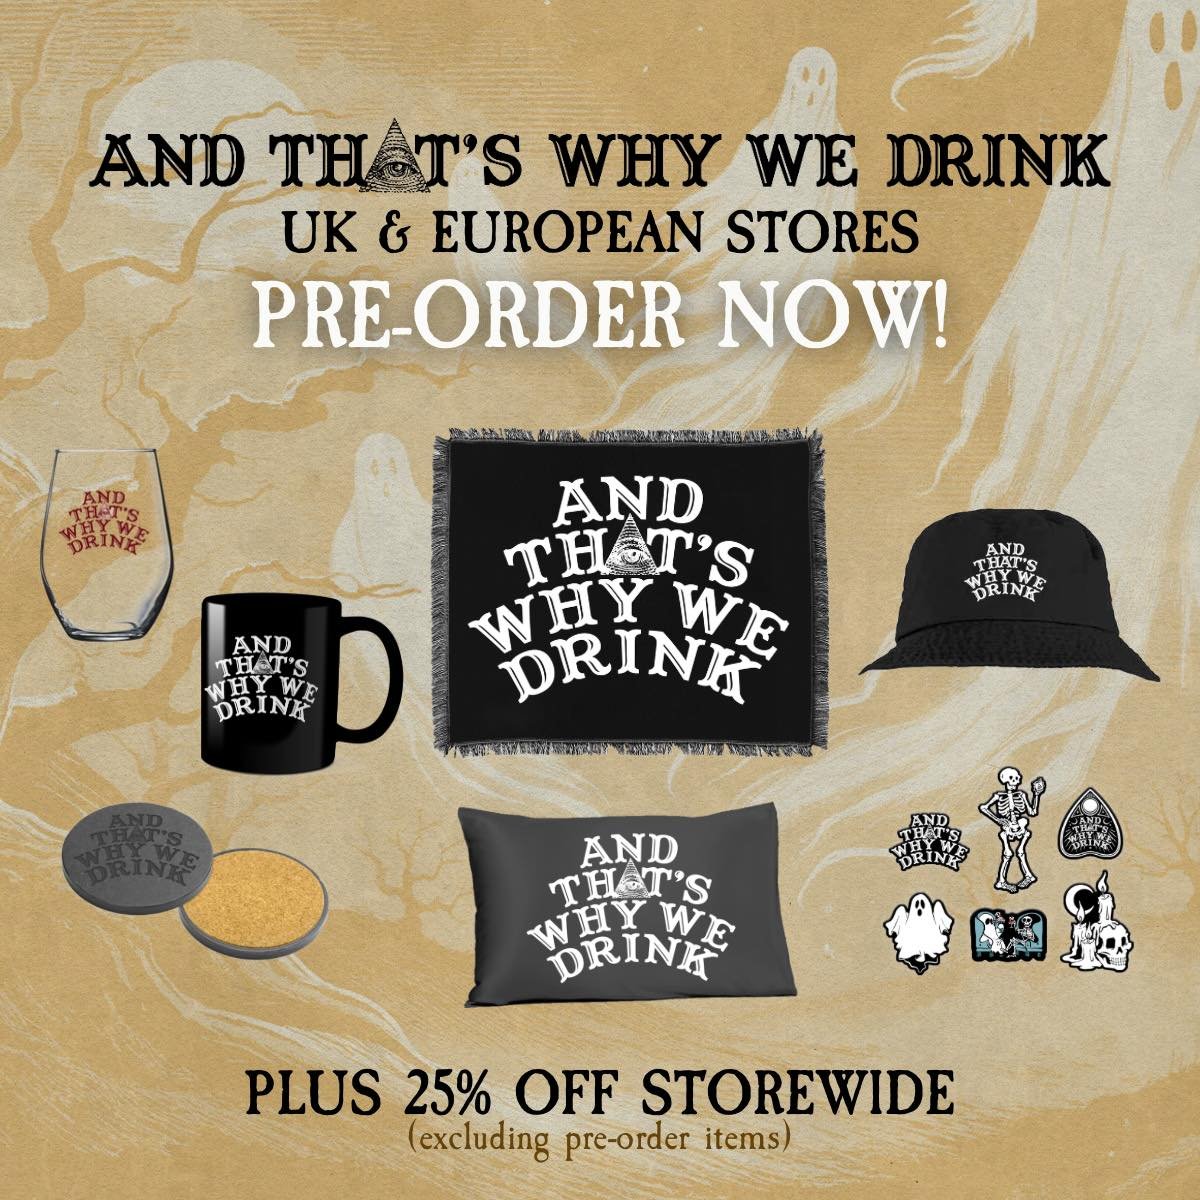 UK &amp; EU Boozers and Shakers!! Make sure to get those pre-orders in before this sale ends on Friday! 

Shop now at atwwdmerch.com/global (link in bio)

#ATWWD #AndThatsWhyWeDrink #AndThatsWhyWeDrinkPodcast #BoozersAndShakers #MerchSale #SpookyMerc